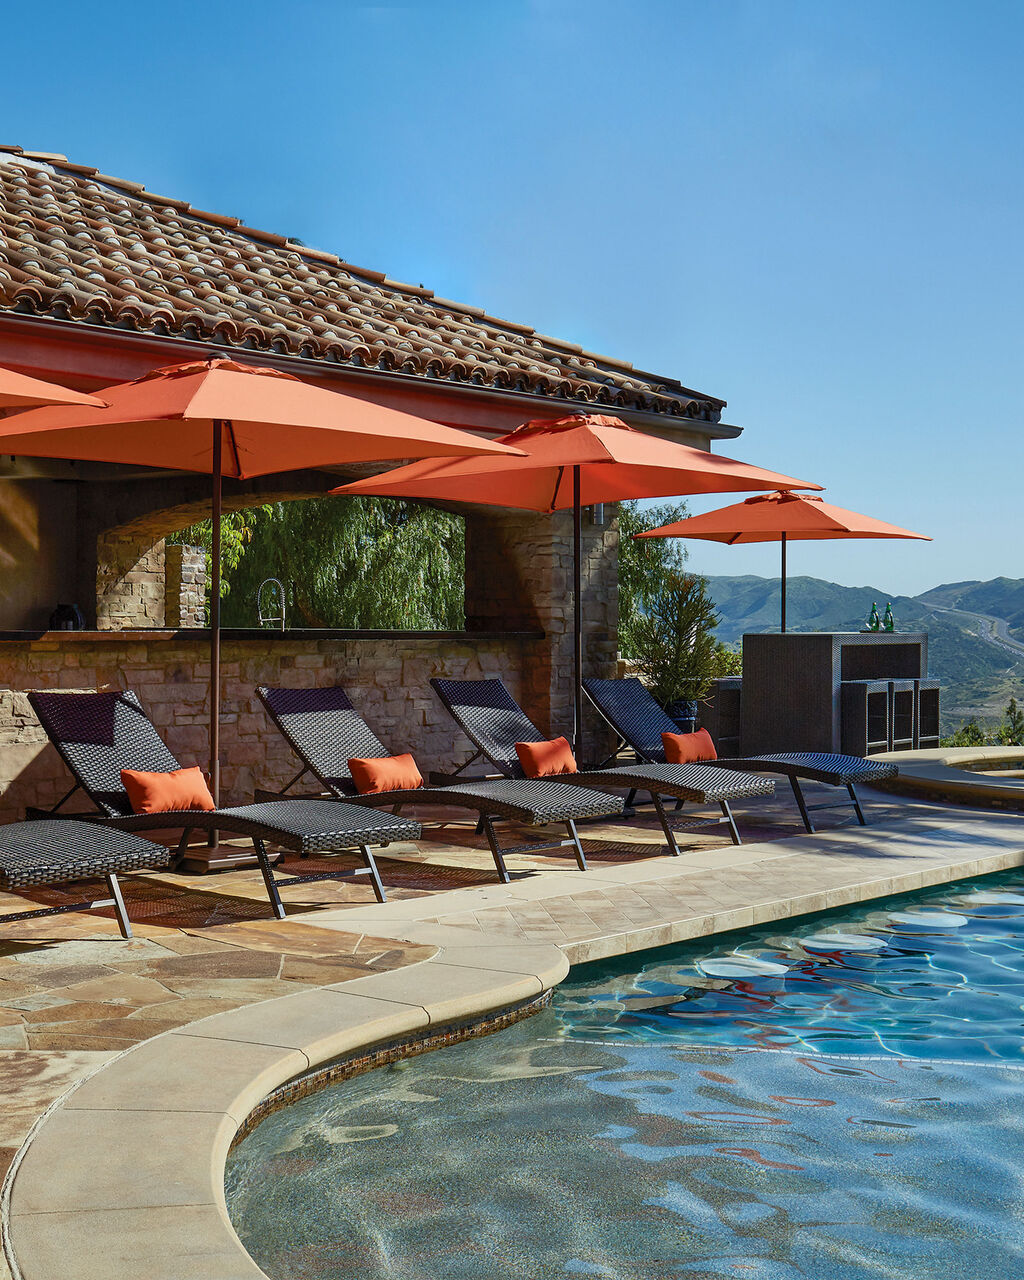 commercial patio furniture series of chaise lounges with umbrellas poolside